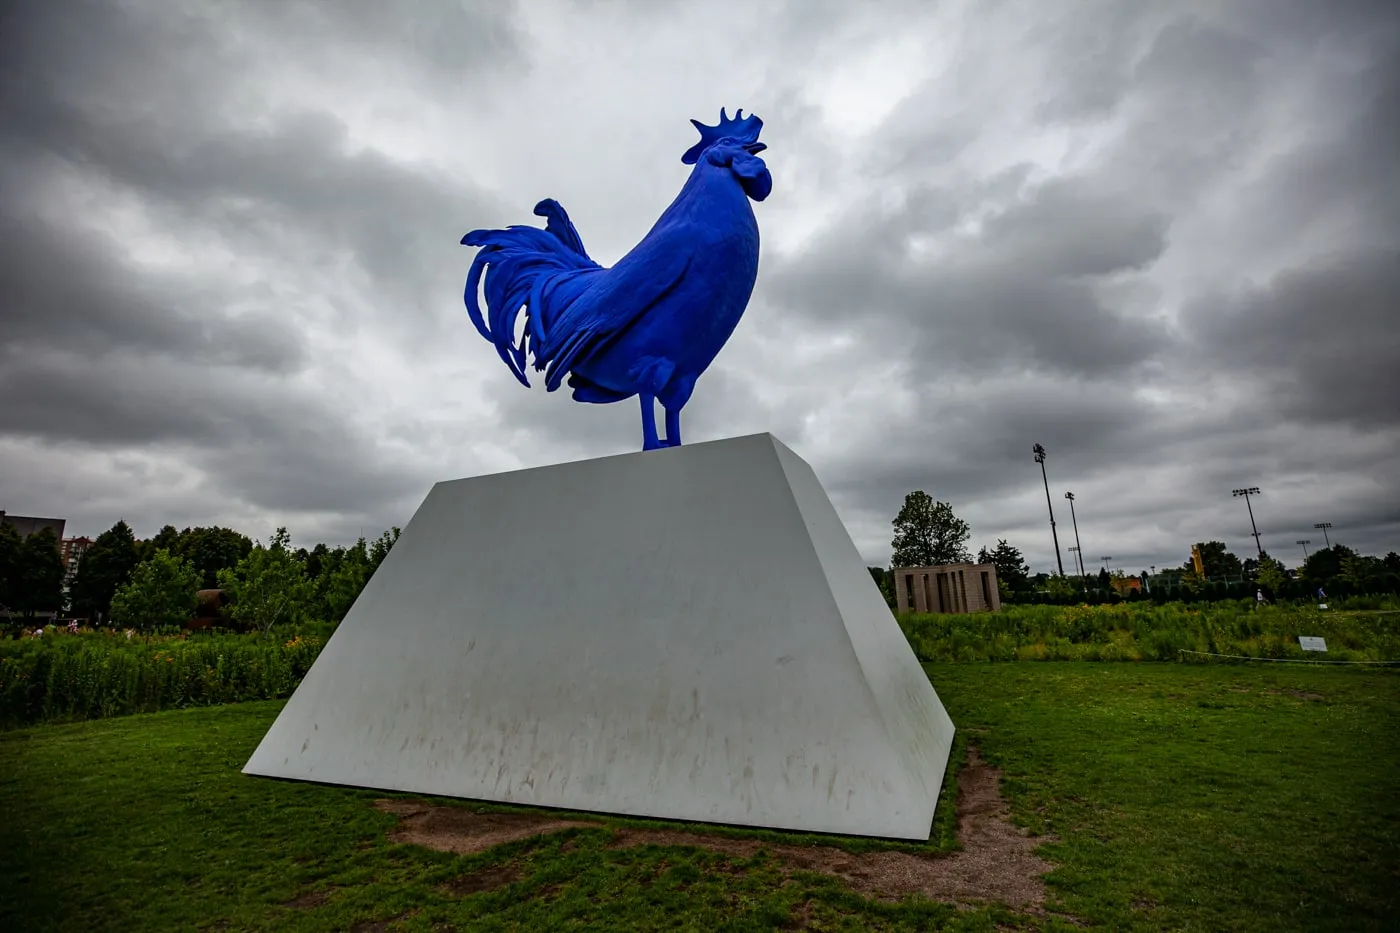 Katharina Fristc's Hahn/Cock - a big blue rooster -  at Minneapolis Sculpture Garden in Minnesota - Minneapolis roadside attractions in Minnesota